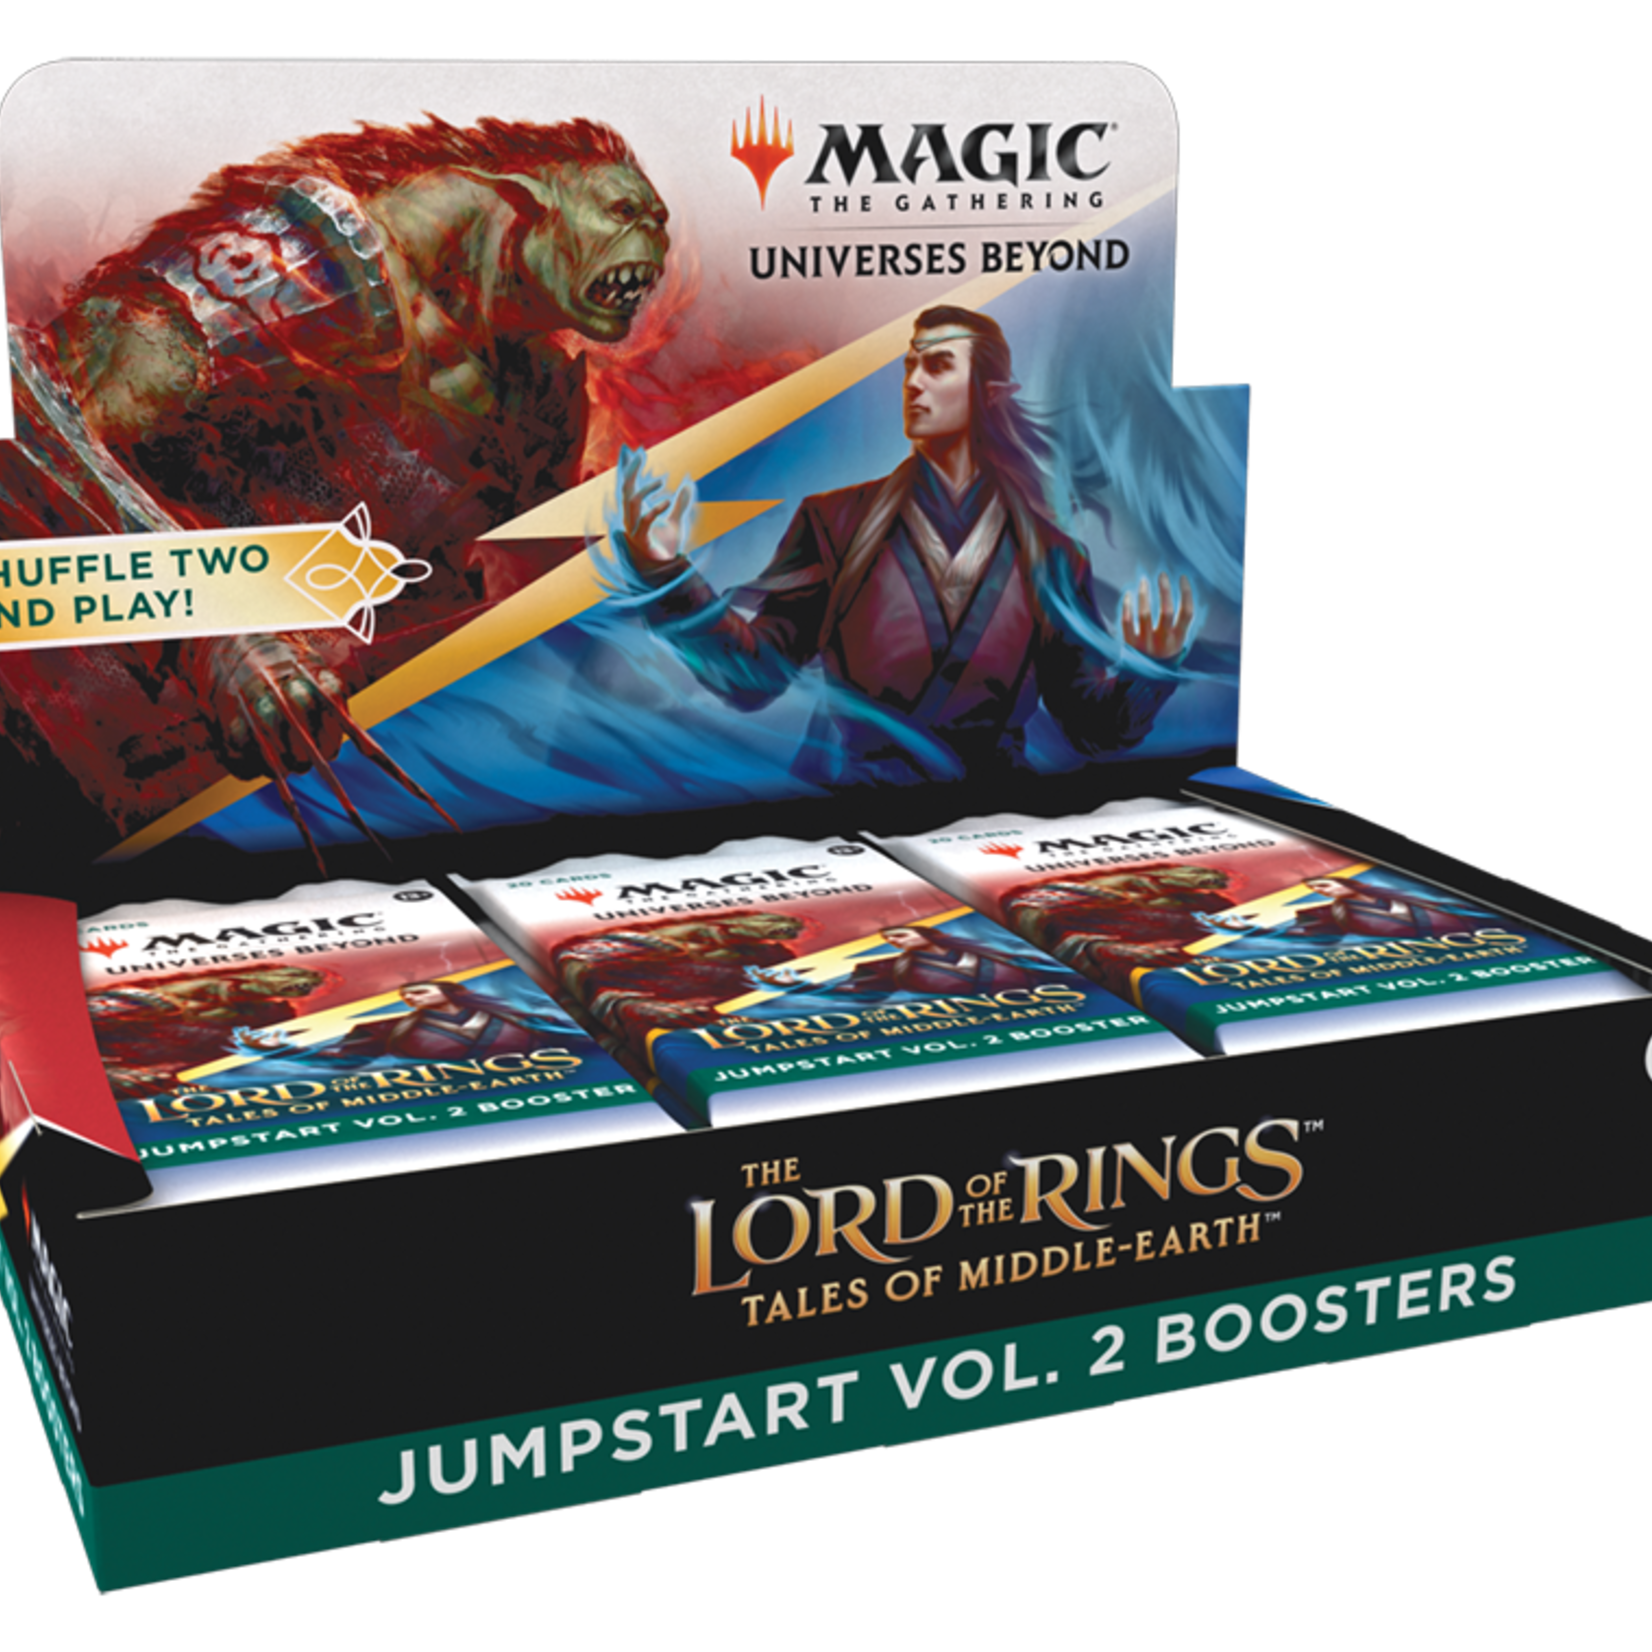 Magic: The Gathering Magic: The Gathering – The Lord of the Rings: Tales of  Middle-earth Set Booster Box